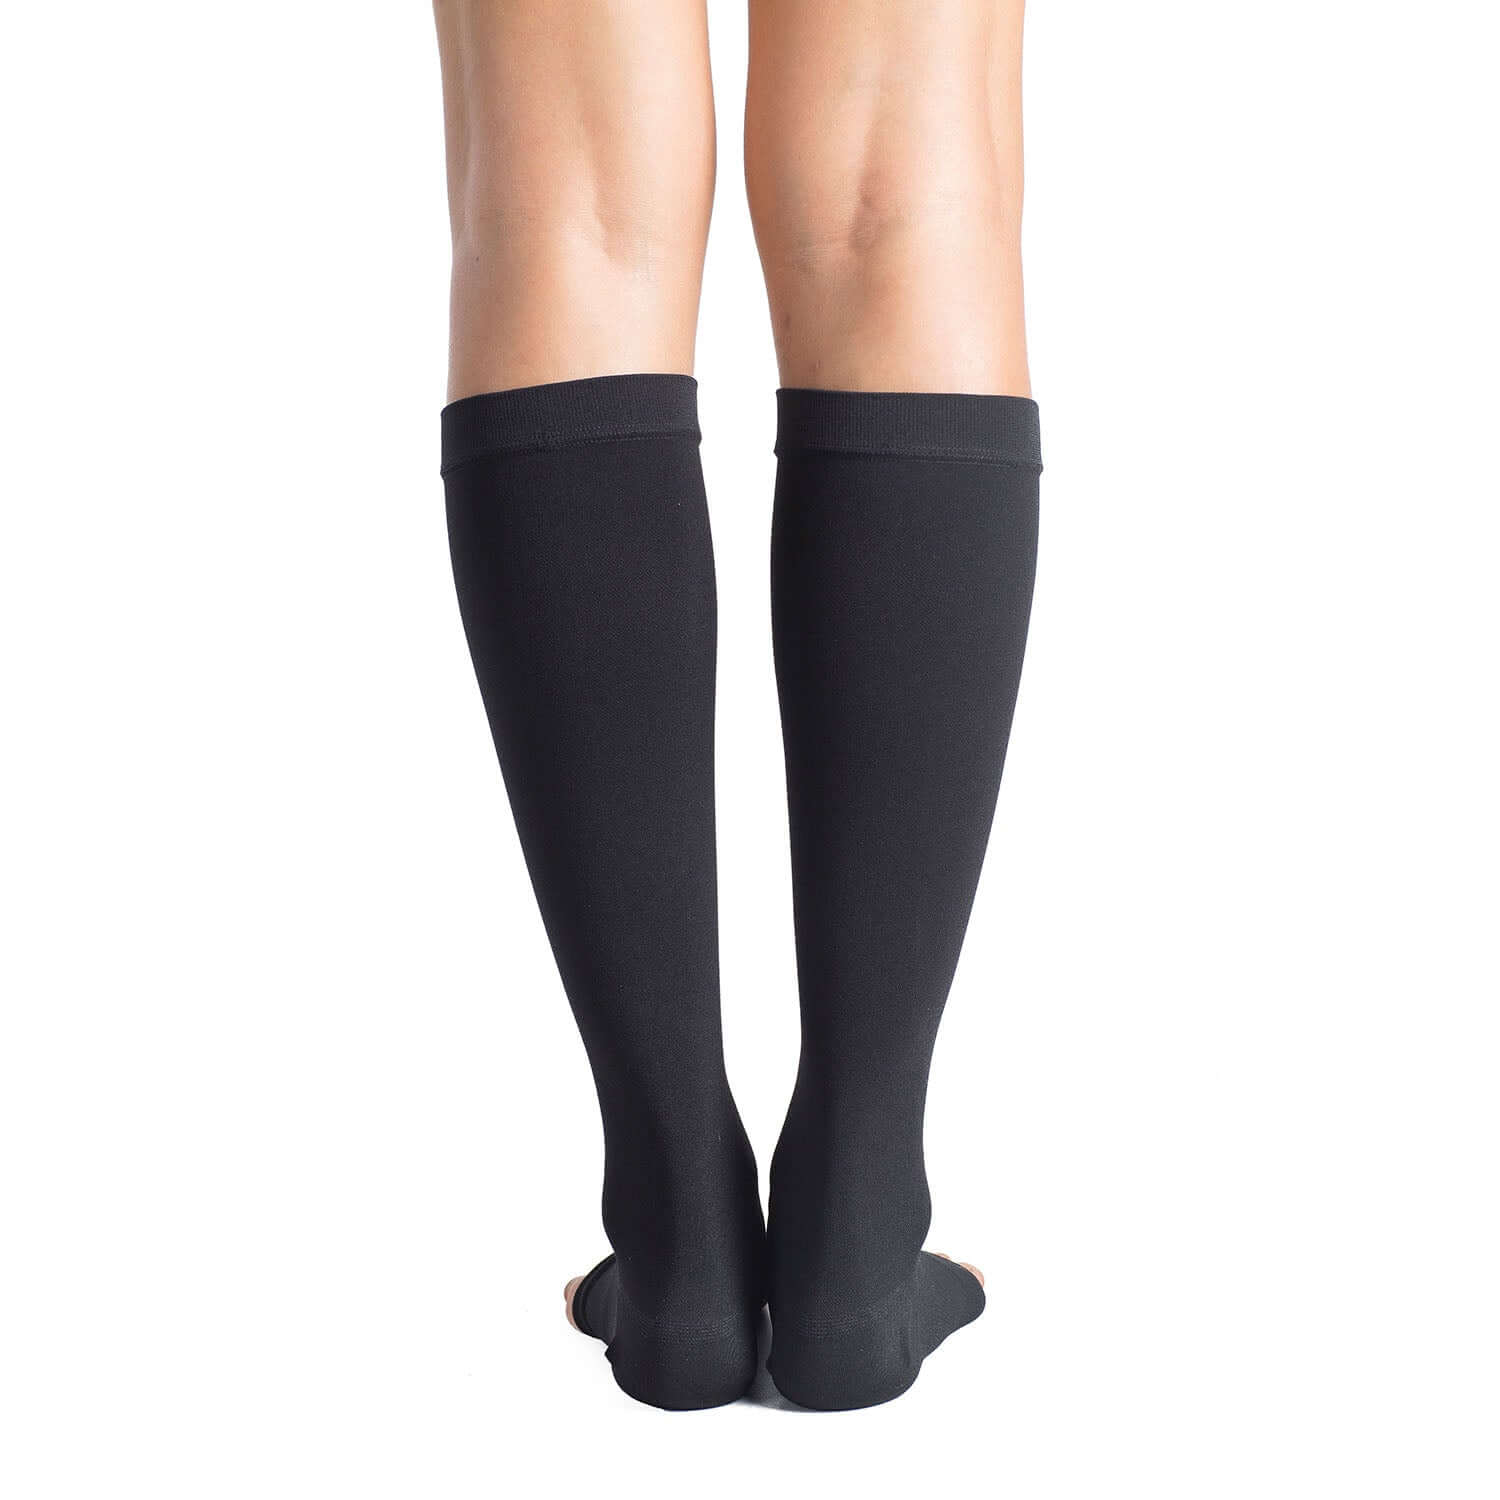 Thigh High Graduated Compression Opaque Stockings, Open-Toe 20-30mmHg Firm  Medical Support Socks